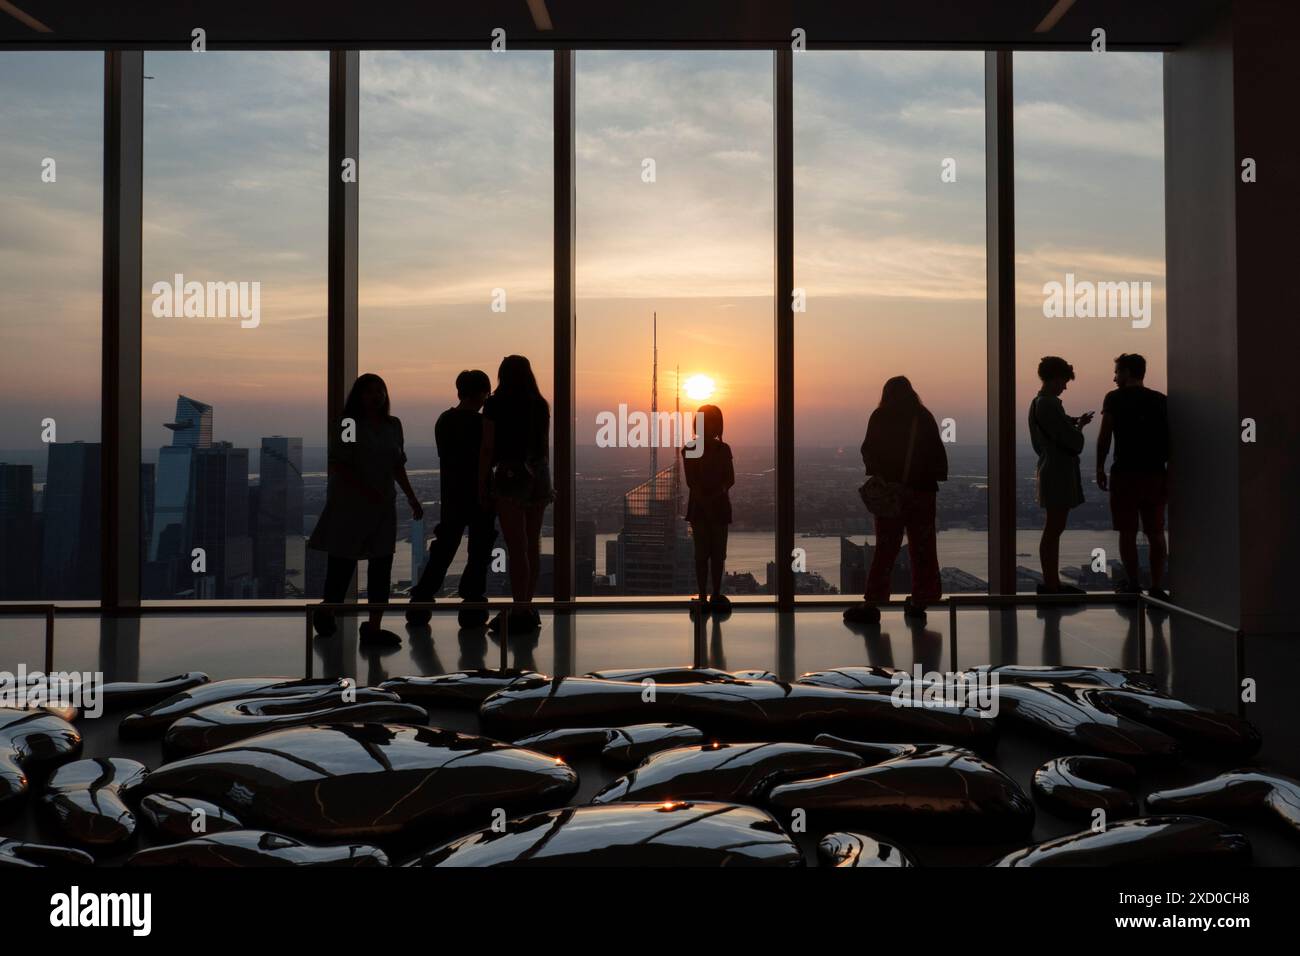 People are enjoying the sunset from the Summit One Vanderbilt observation deck in New York, U.S., on Thursday, June 18, 2024. The Summit One Vanderbilt is a veritable wonderland of sensory experiences. Kenzo Digital, the artist who designed each room, uses mirrors to reflect and refract the city that surrounds the structure. The attraction takes visitors to the 93rd floor, high above iconic skyscrapers like the Empire State Building and the Chrysler Building. Stock Photo